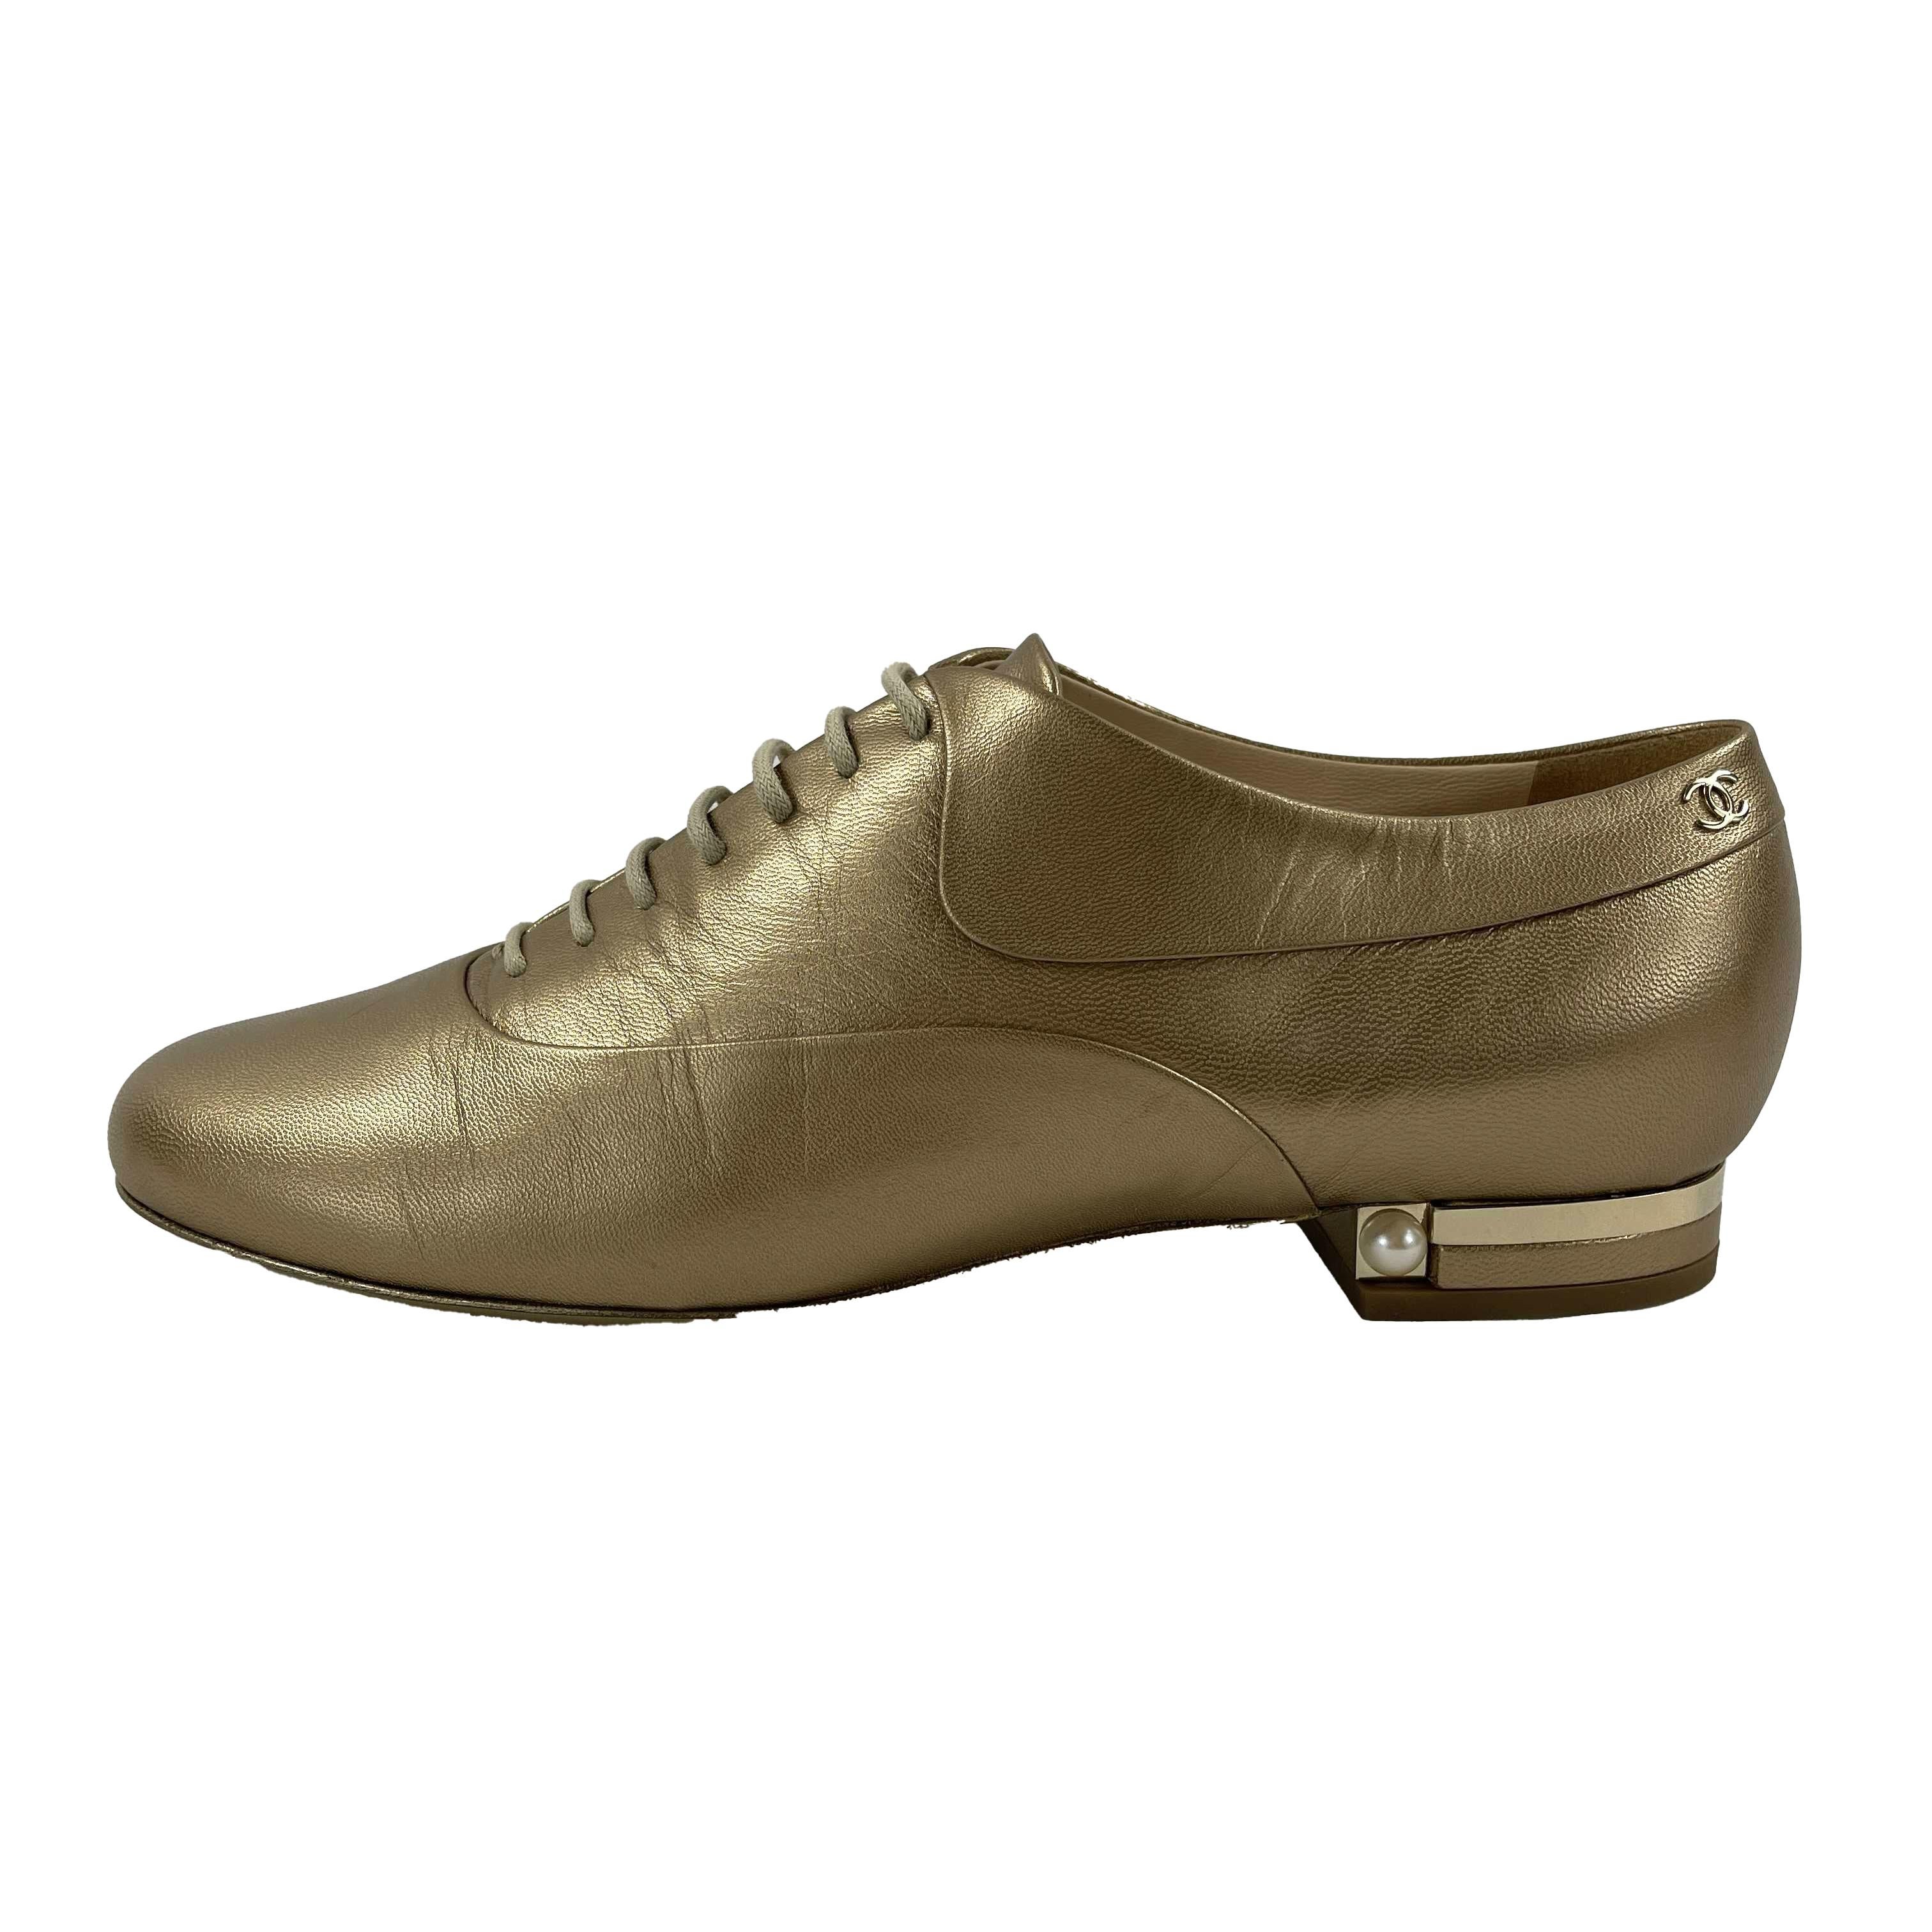 CHANEL NEW 2015 Metallic Gold Leather CC / Pearl Oxford Shoes 39 US 9 5